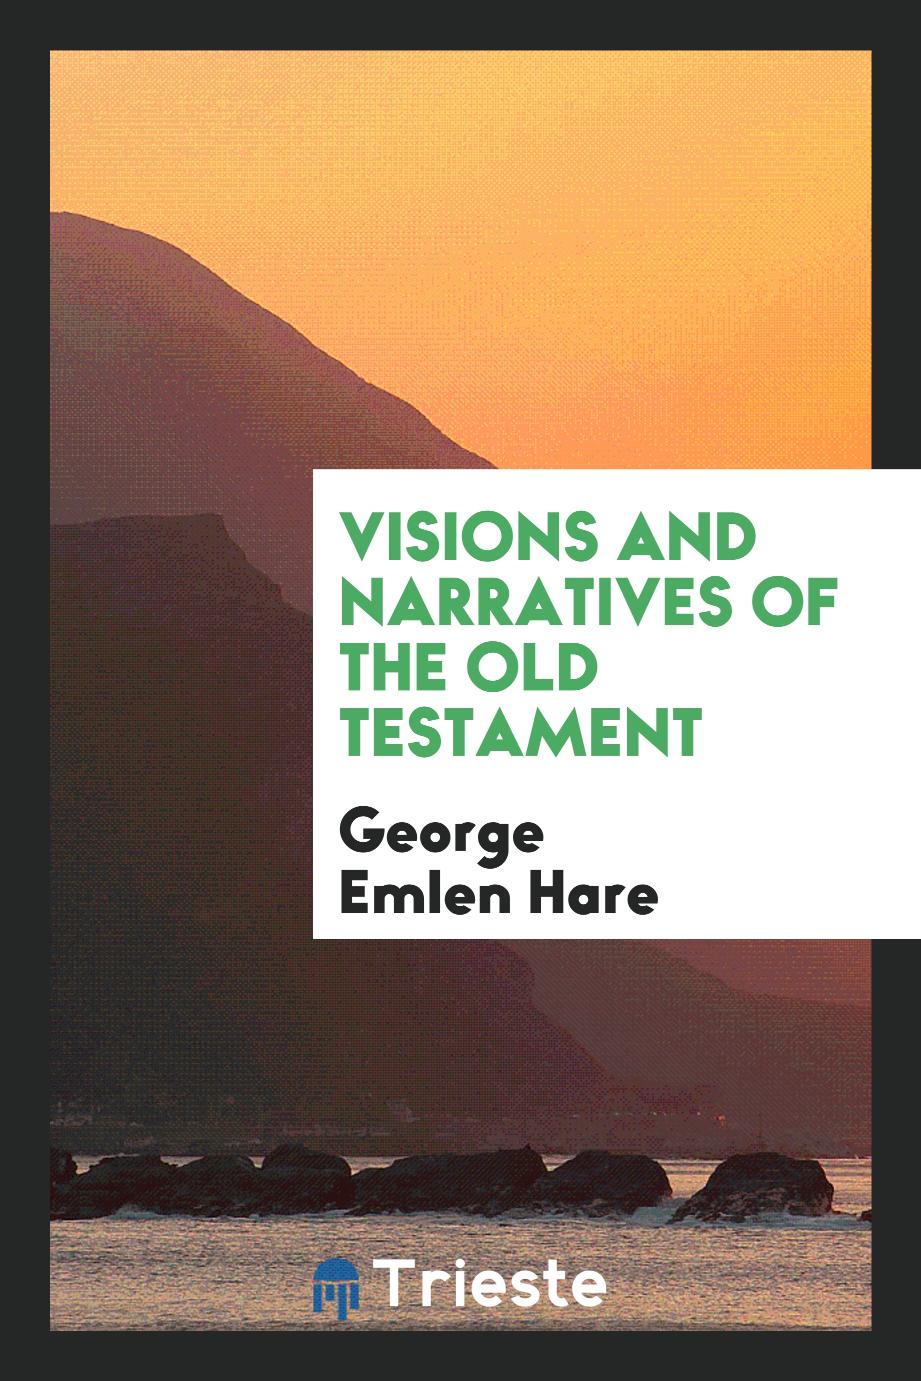 Visions and narratives of the Old Testament